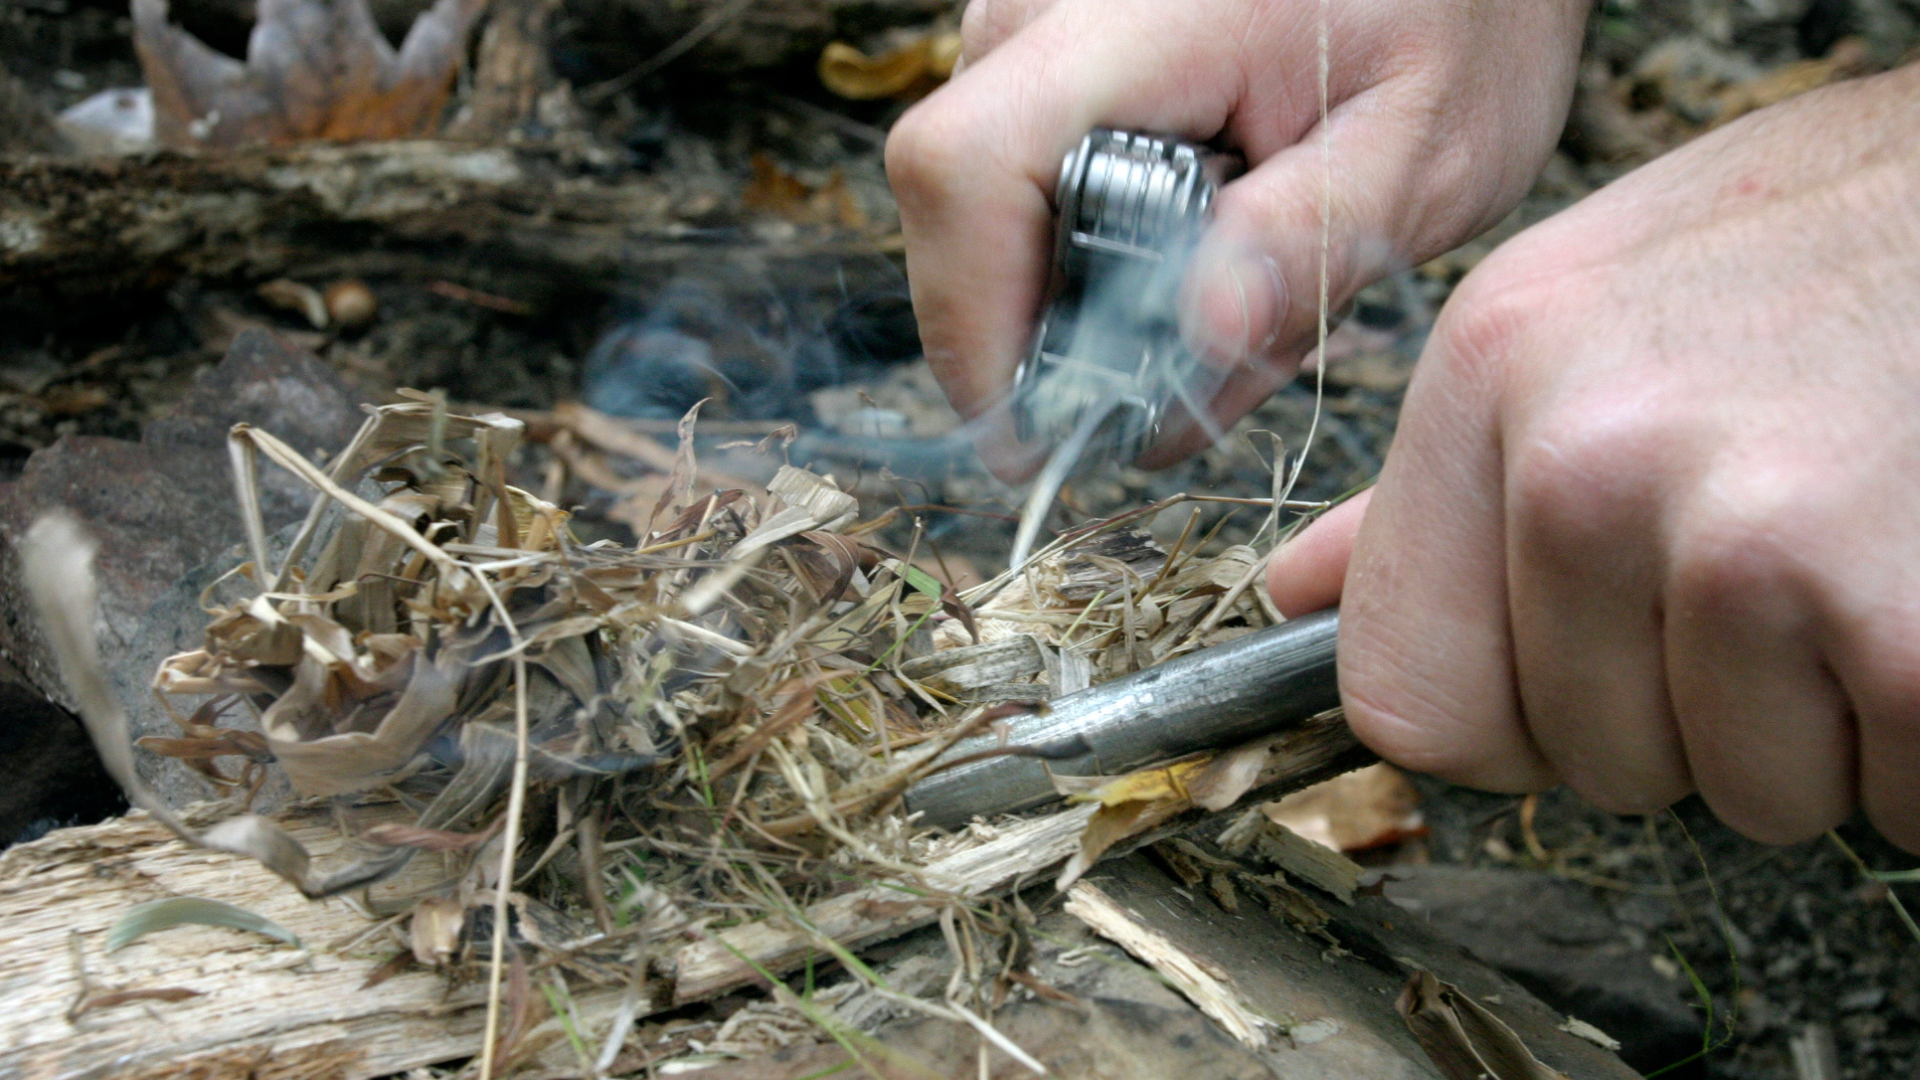 Close up of person using fire starter kit to make campfire